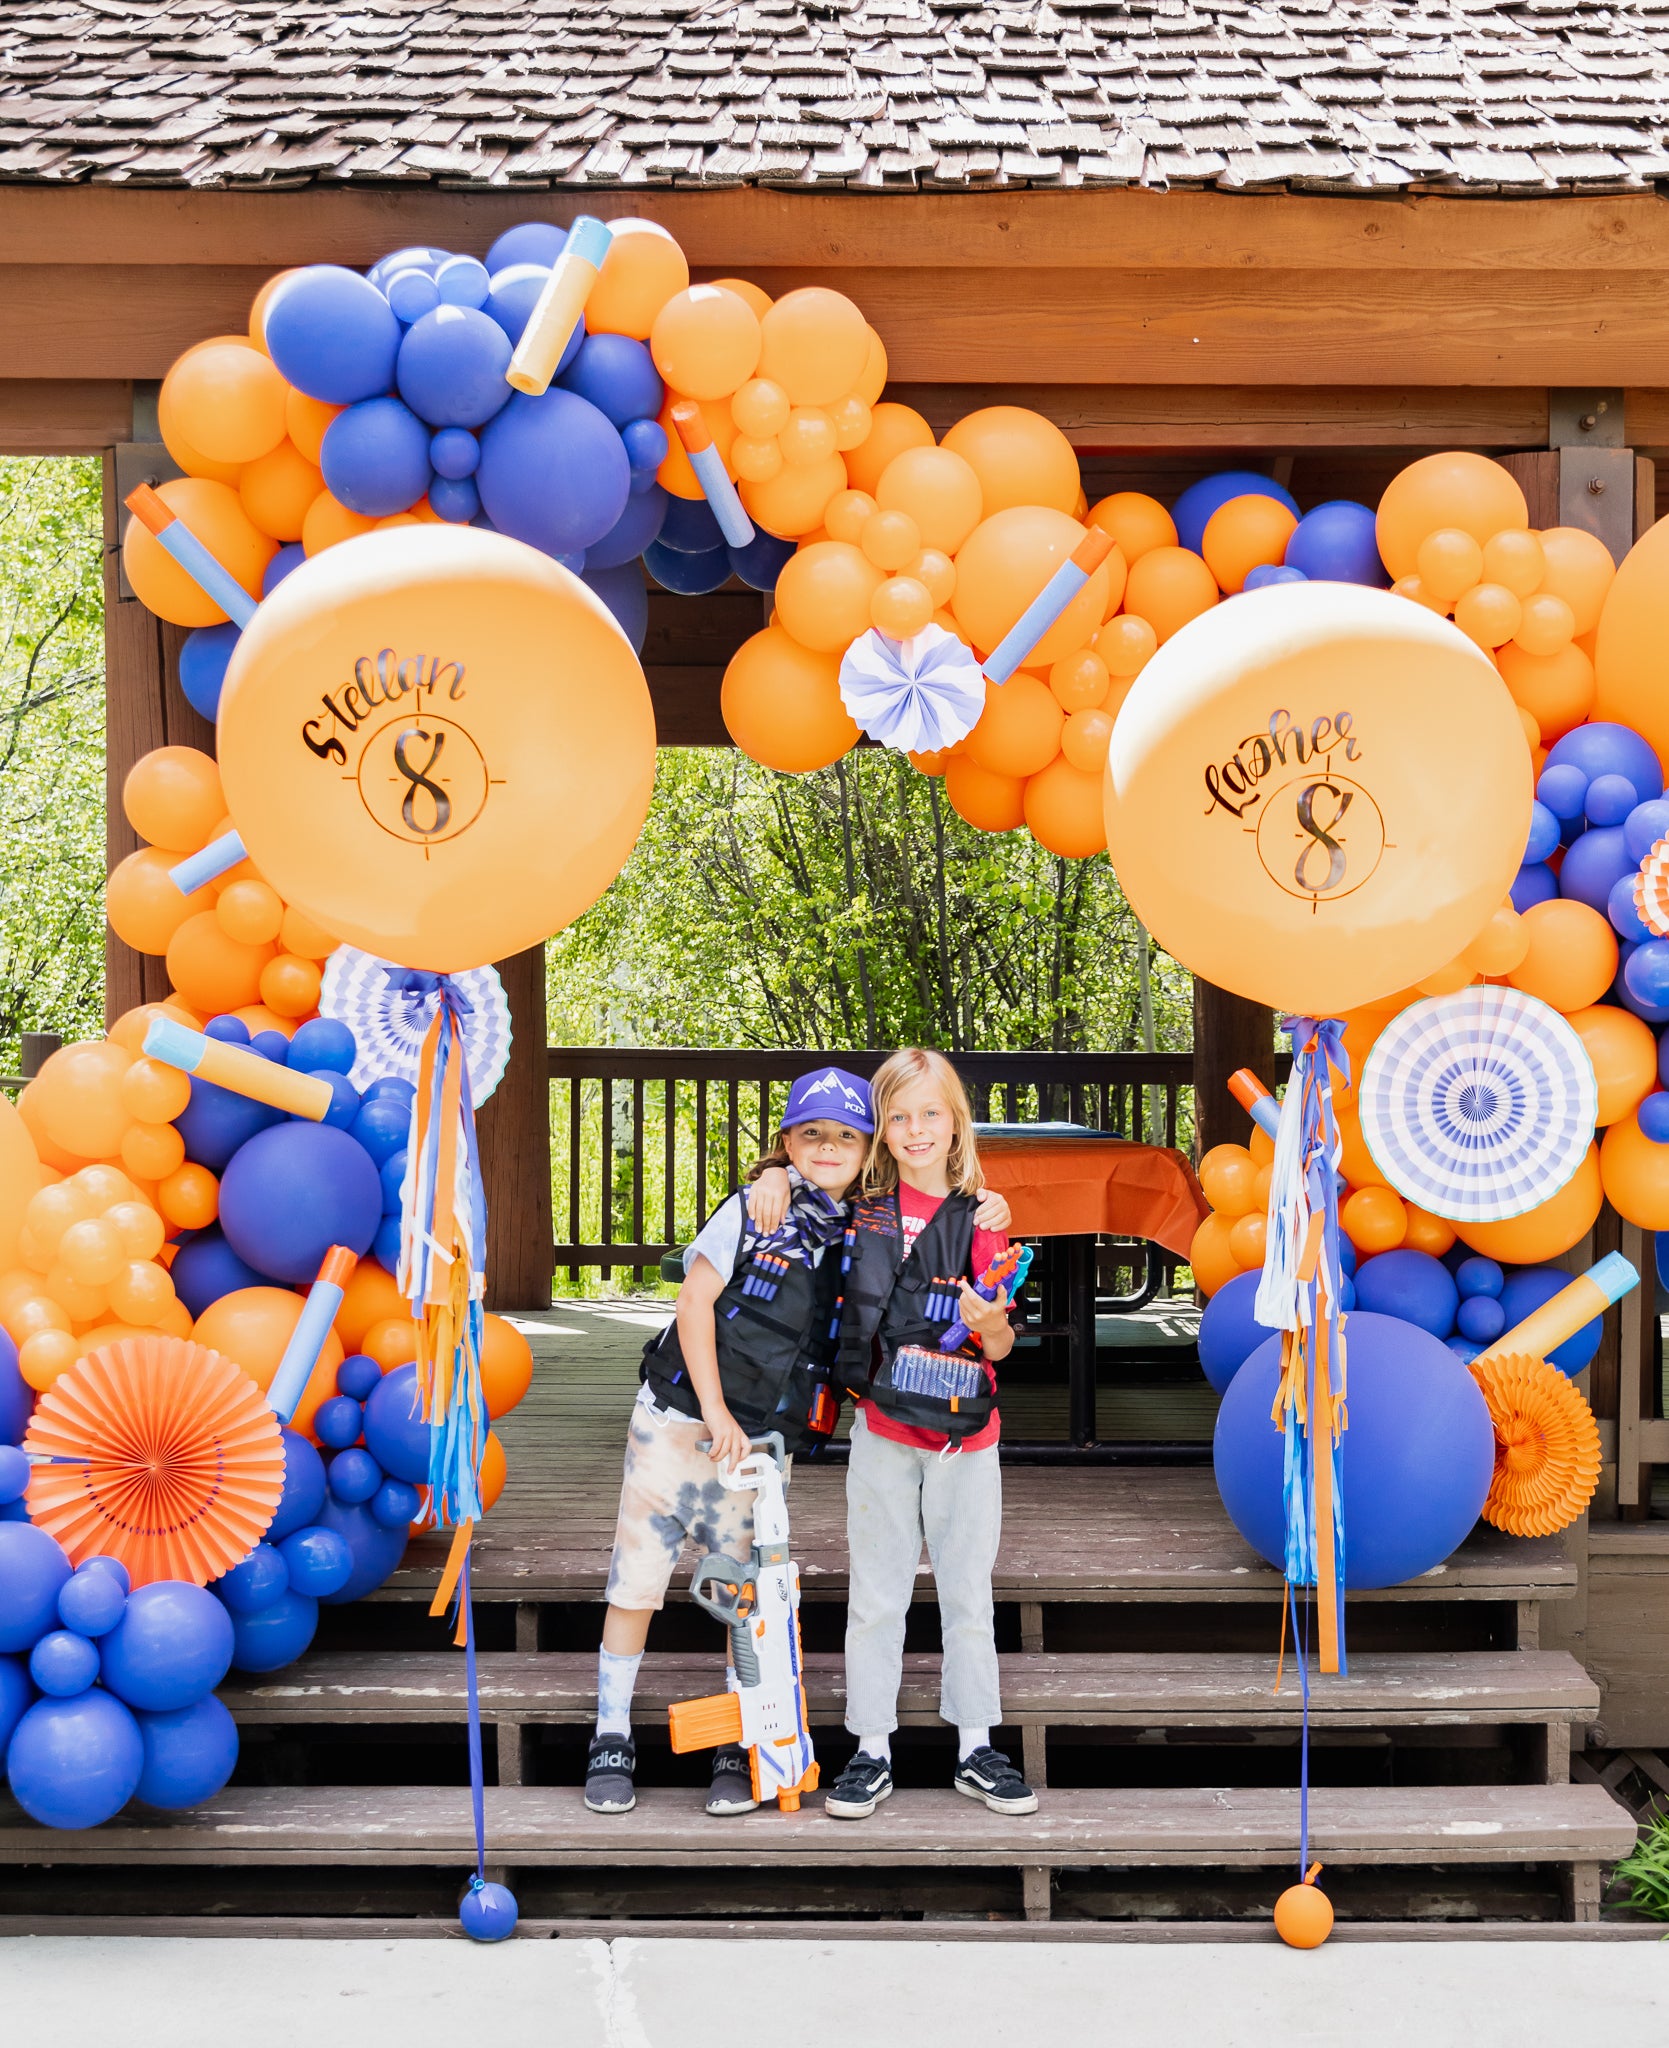 Nerf-themed party ideas for a boy's birthday party.